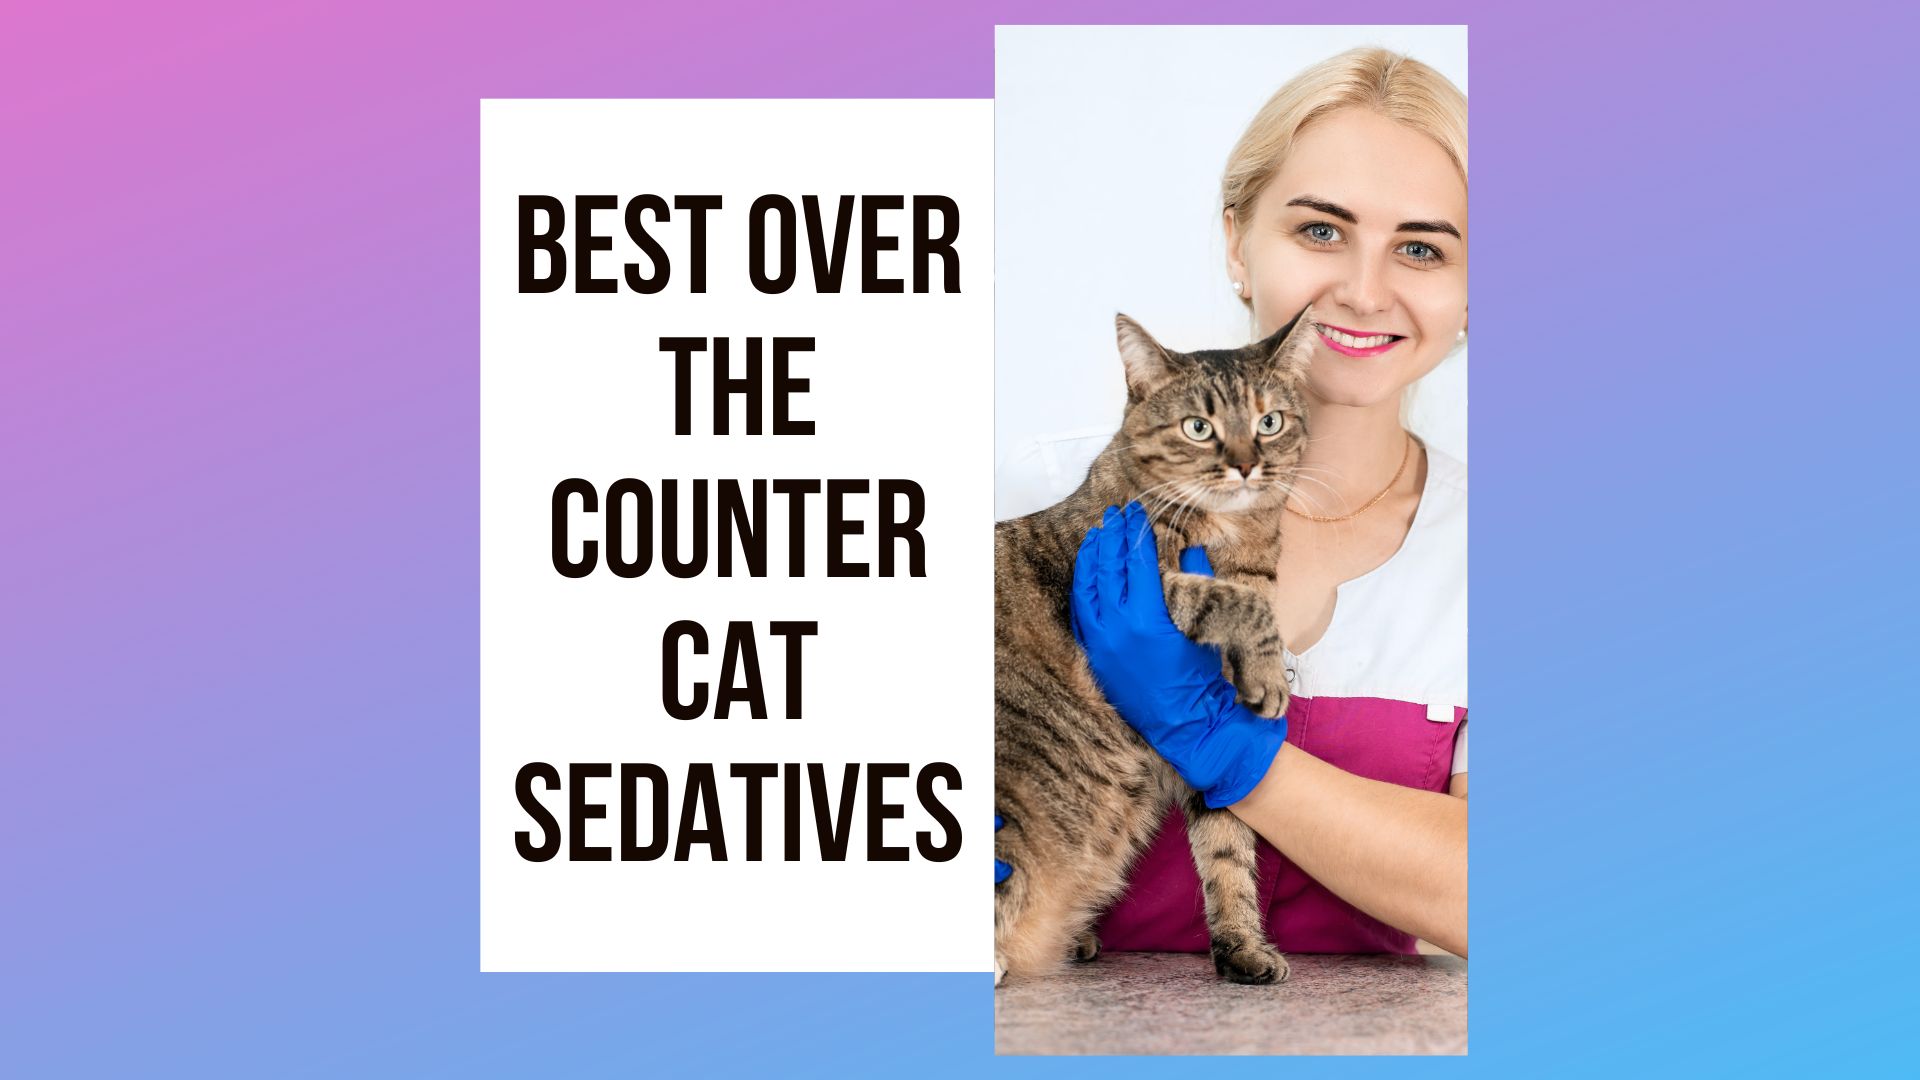 Need an Over the Counter Cat Sedative?